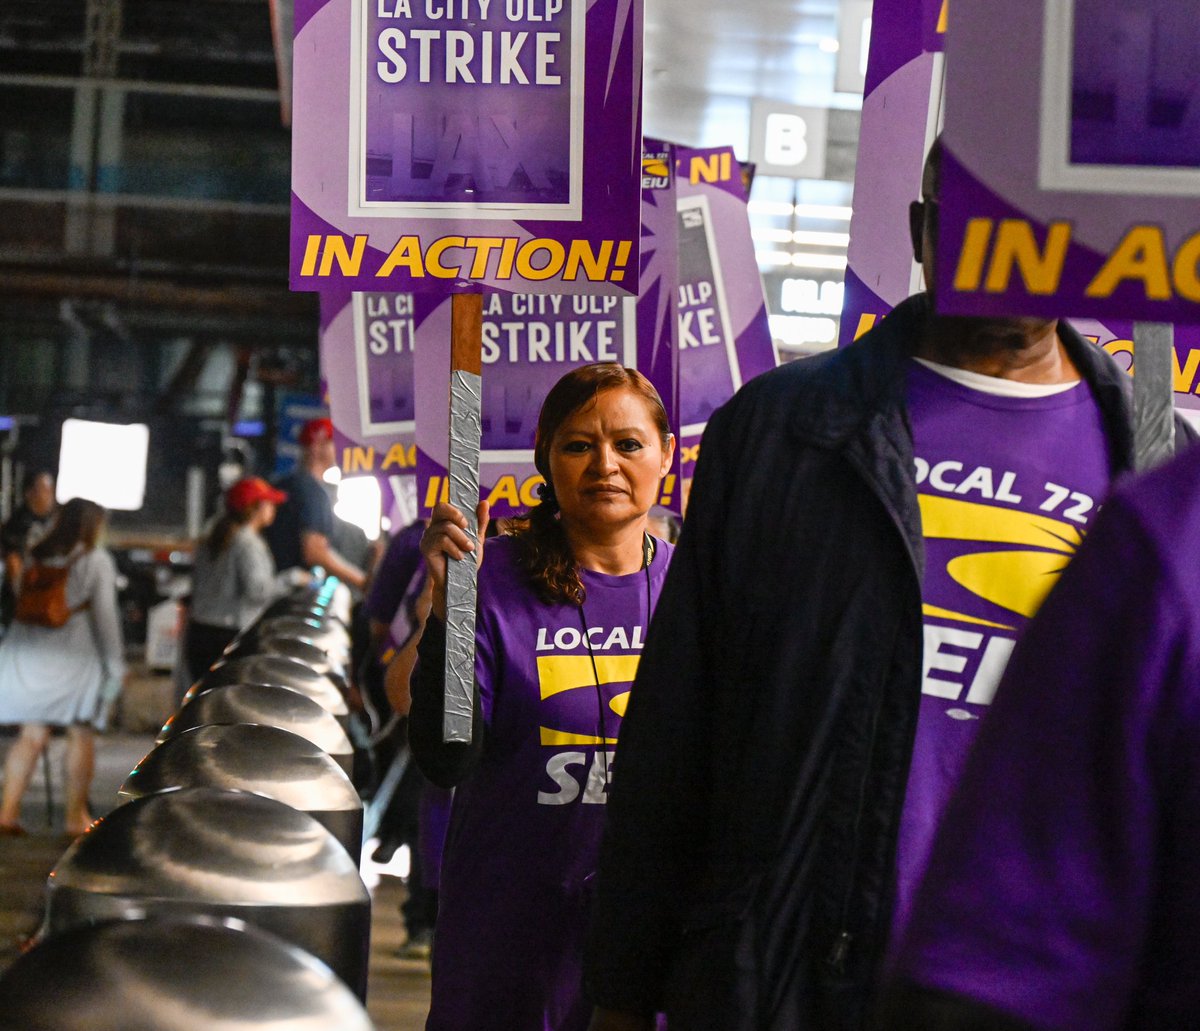 Today 11,000 Los Angeles City workers are on strike for the first time in over 40 years.

This is the scene right now at LAX. #SolidaritySummer